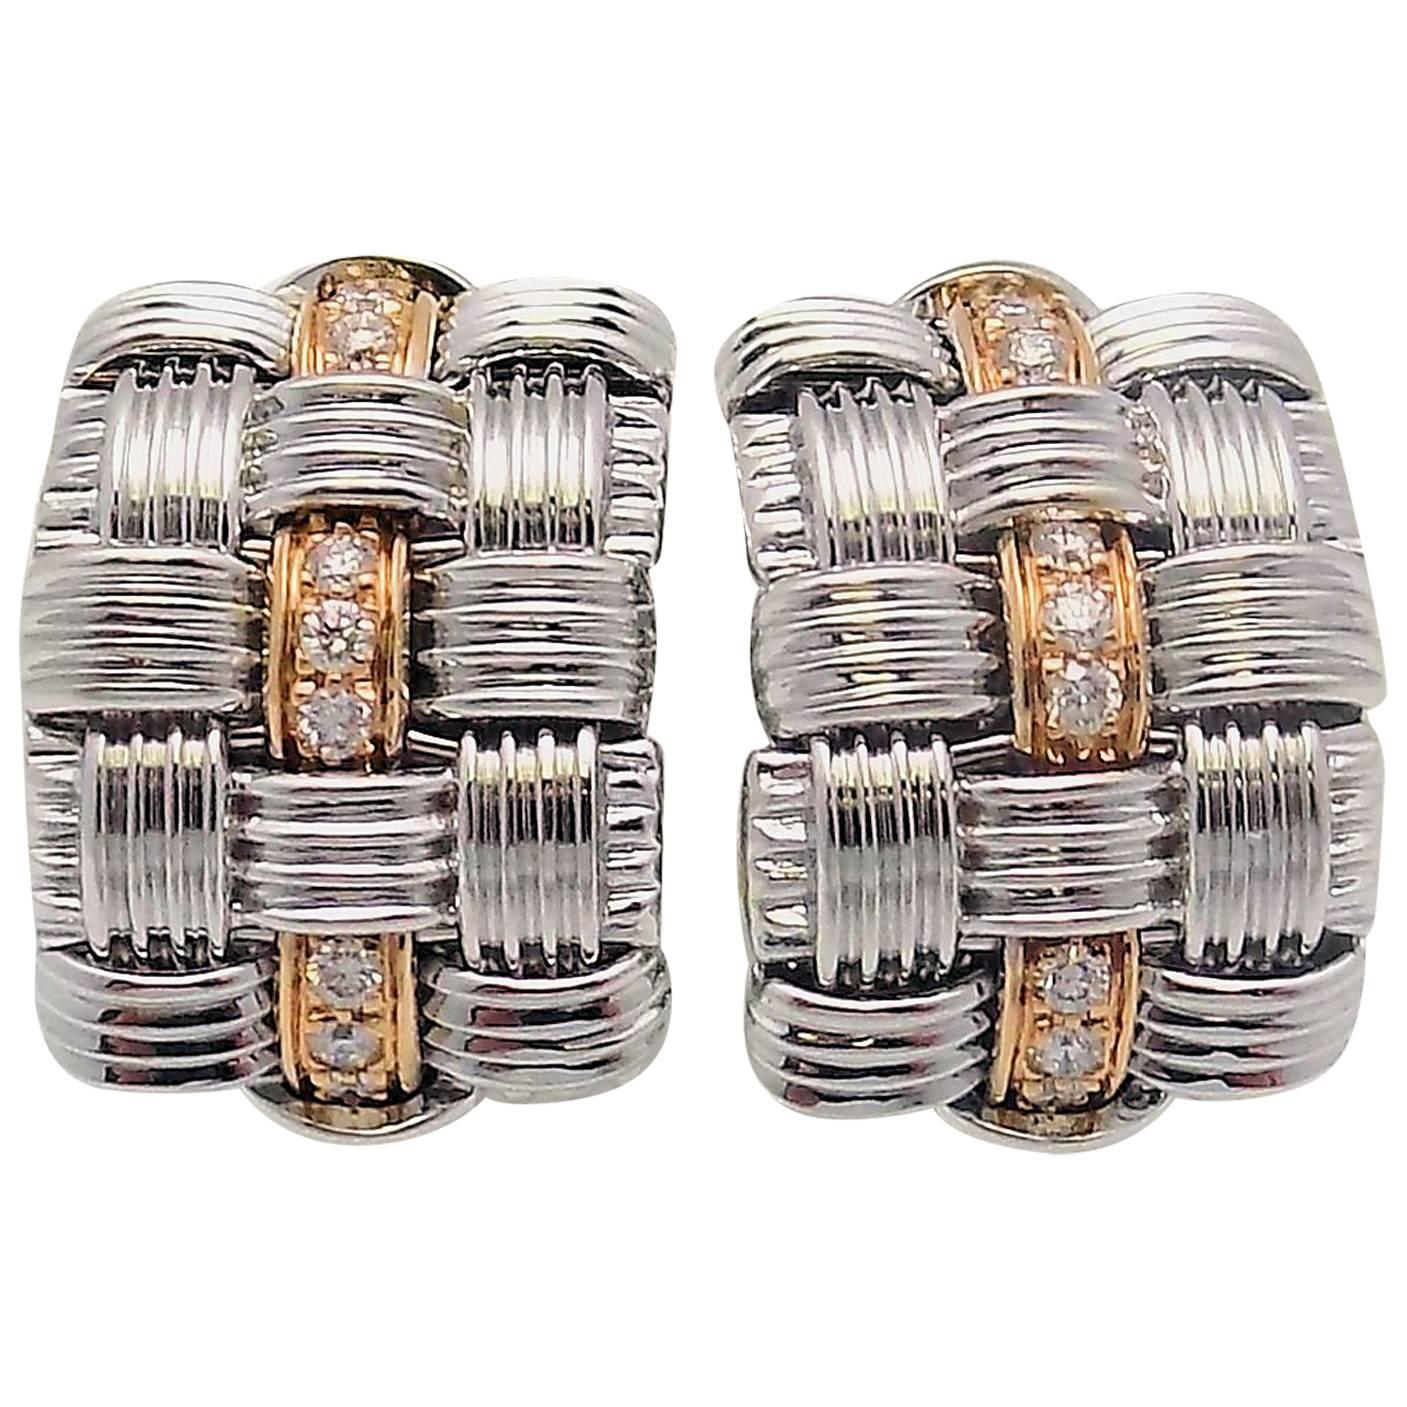 Roberto Coin Appassionata White and Rose Gold Diamond Triple Row Earrings 